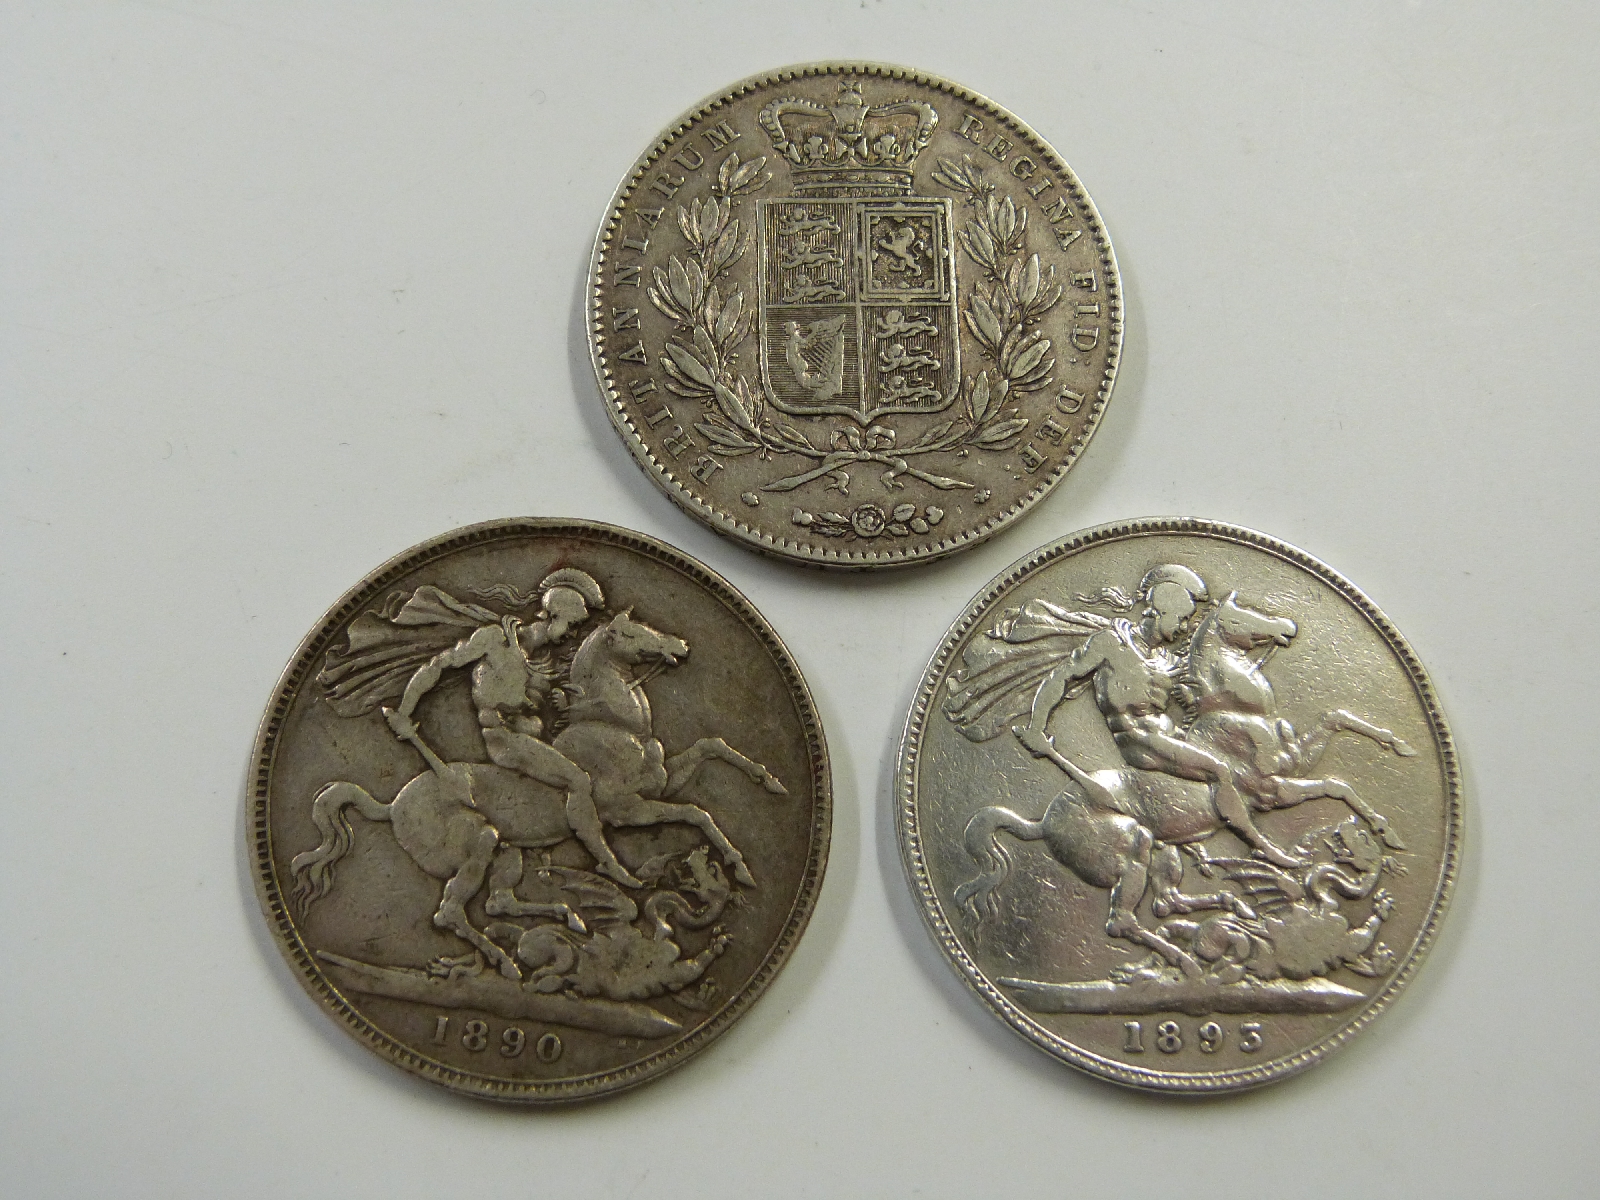 A trio of Victorian crowns to include young head 1845 VIII with cinquefoil, 1893 veiled head and - Image 2 of 2